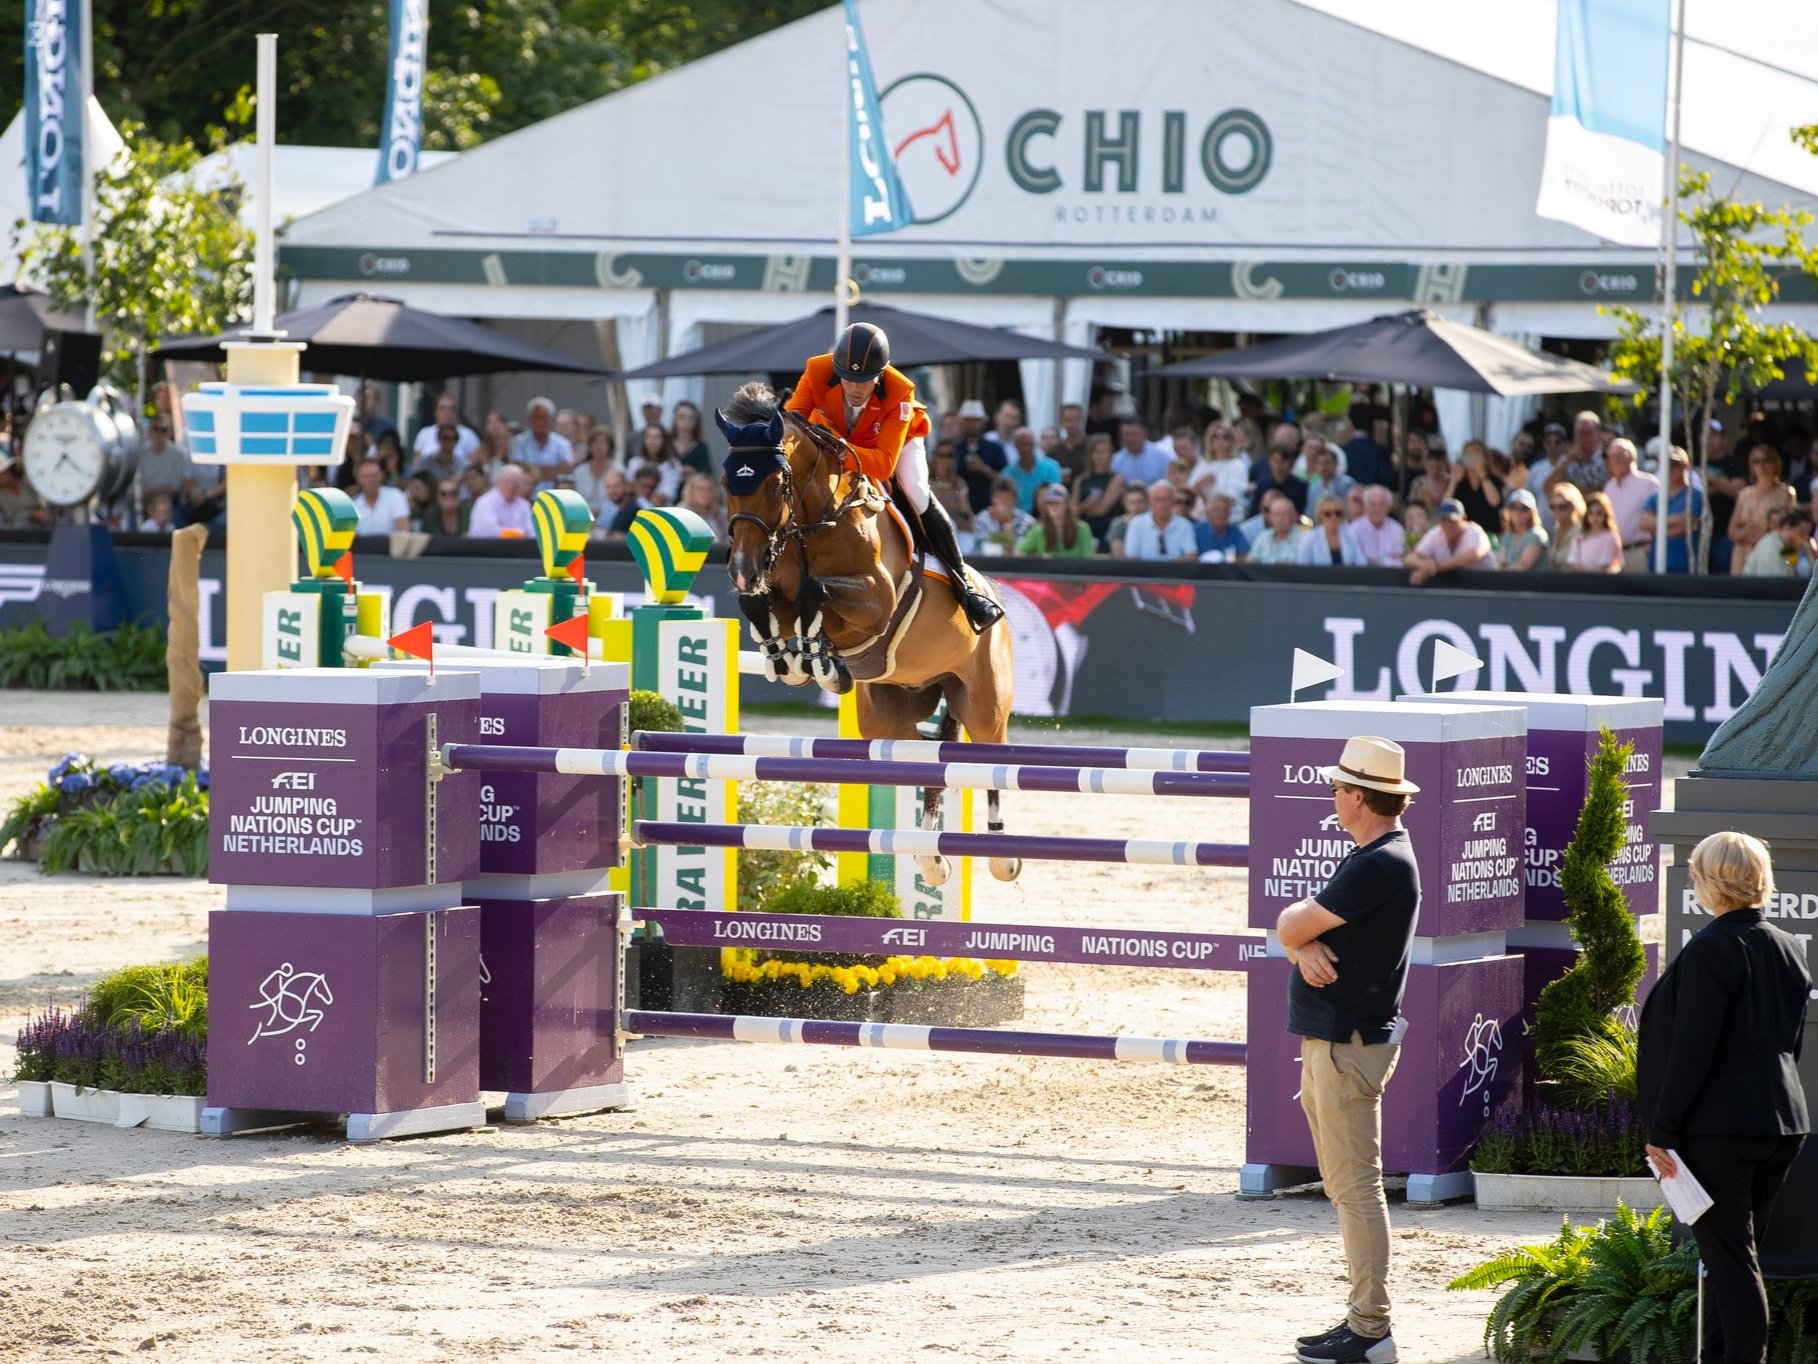  Harrie Smolders riding Monaco to 1st place with The Dutch team at the 2023 Longines FEI Jumping Nations Cup of The Netherlands. 